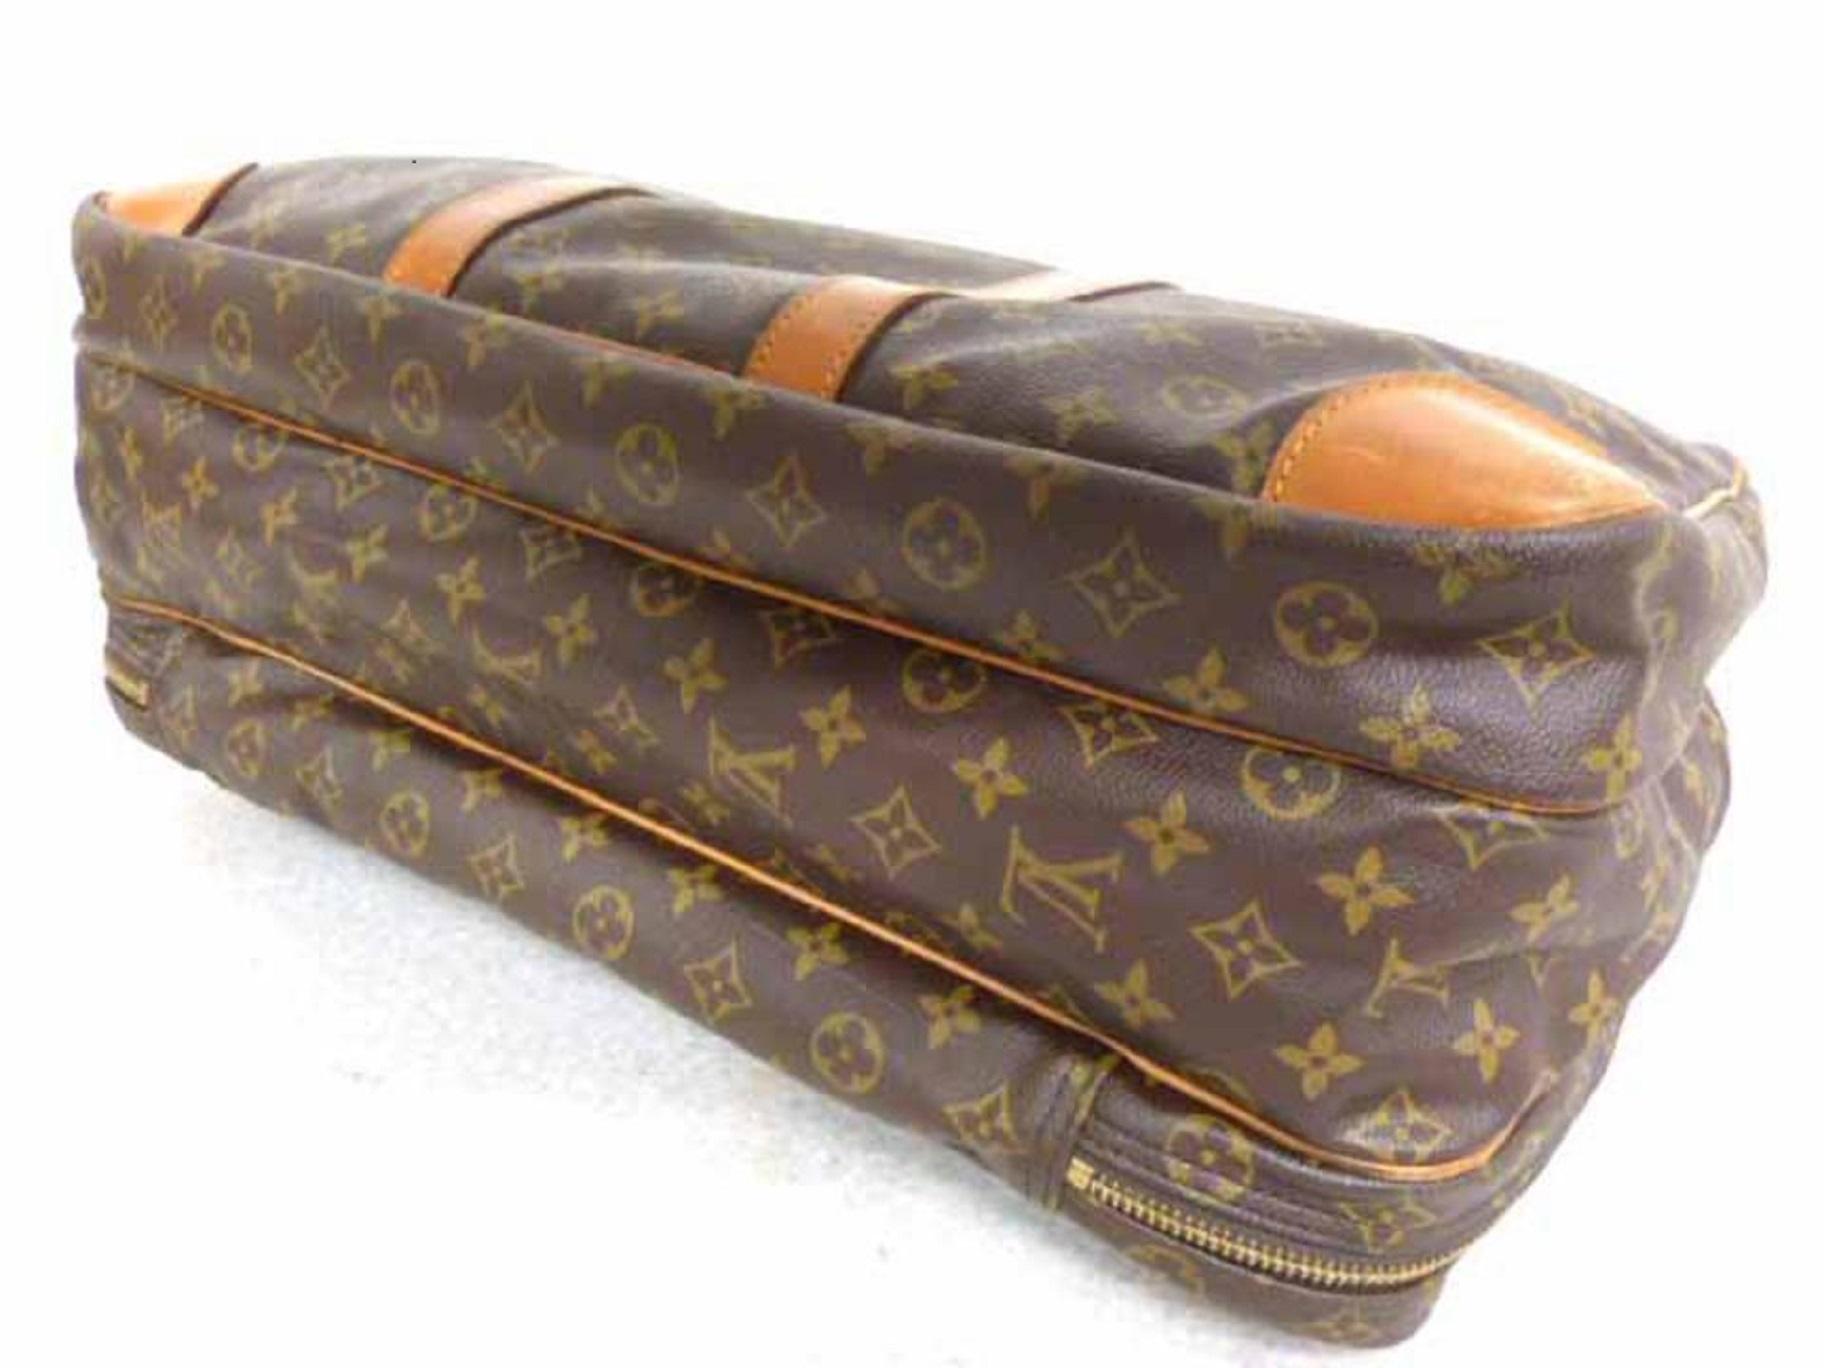 Louis Vuitton Poche Sac Trois 223277 Brown Coated Canvas Weekend/Travel Bag For Sale 5